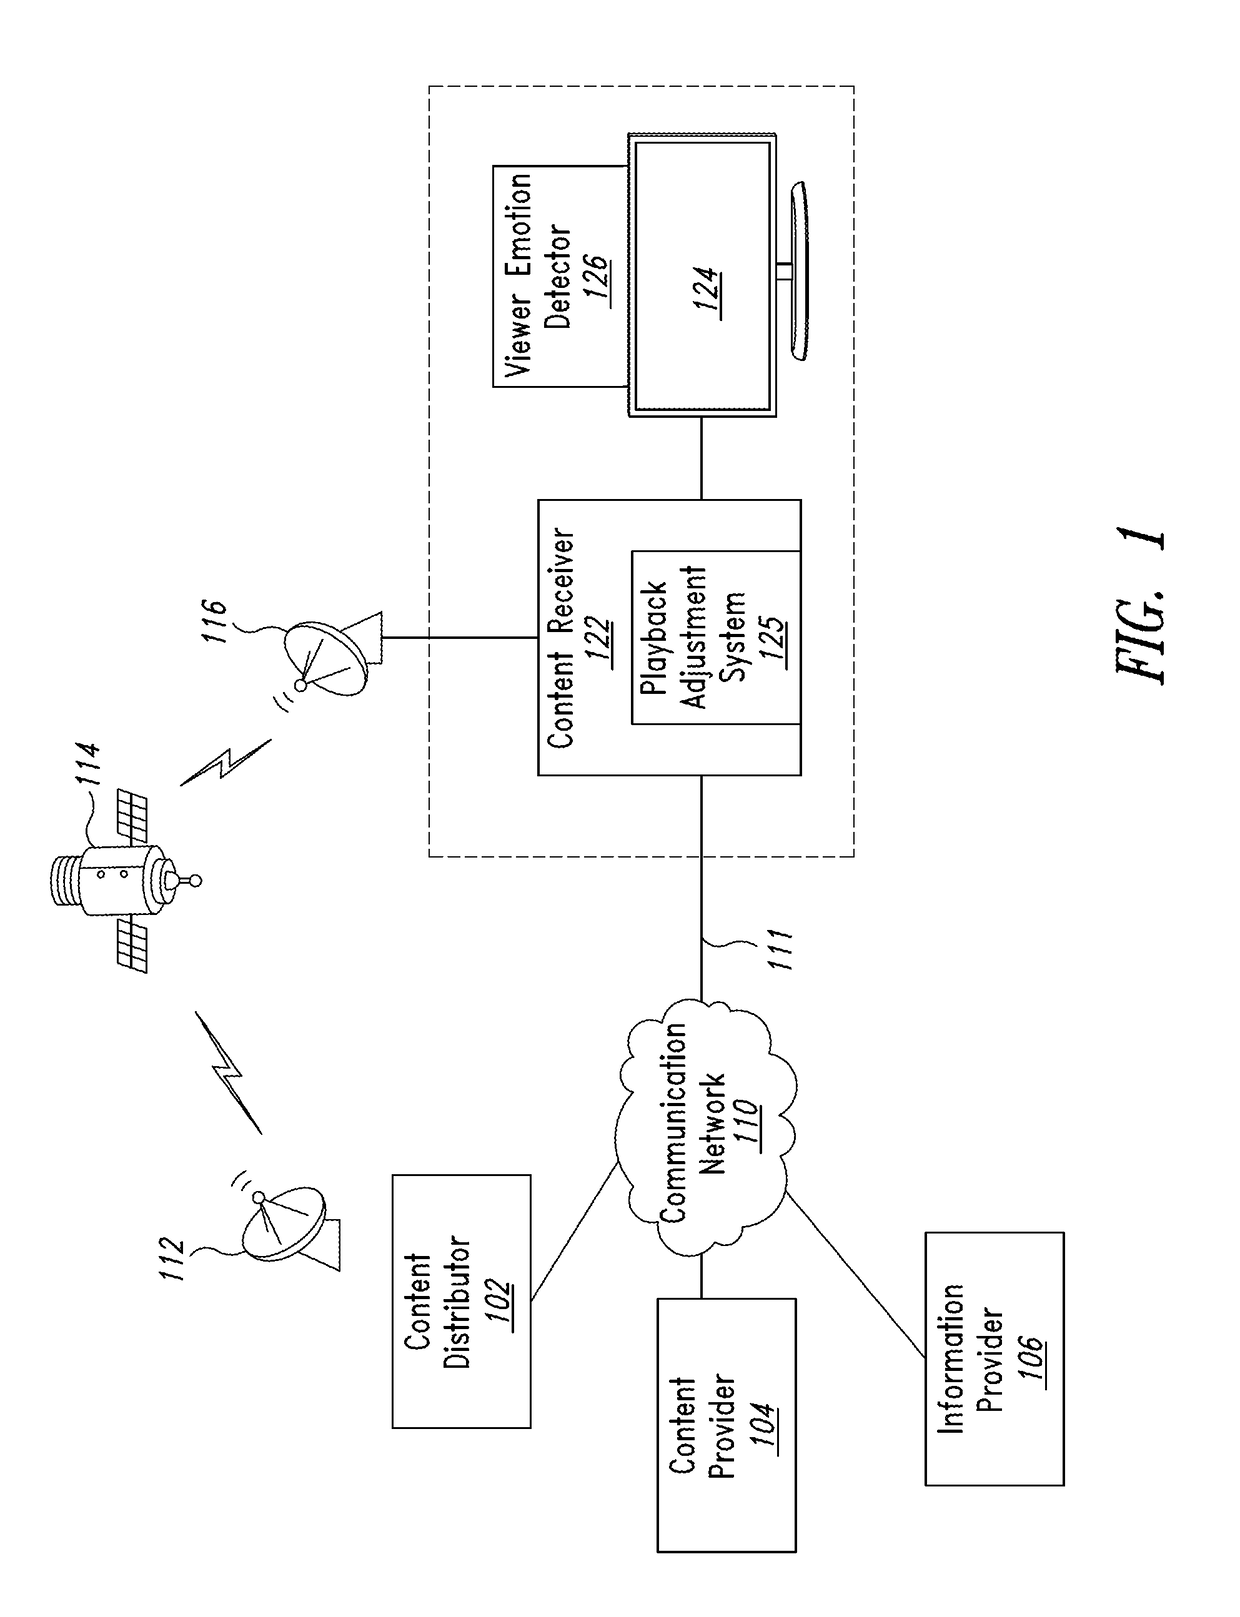 System and method for dynamically adjusting content playback based on viewer emotions